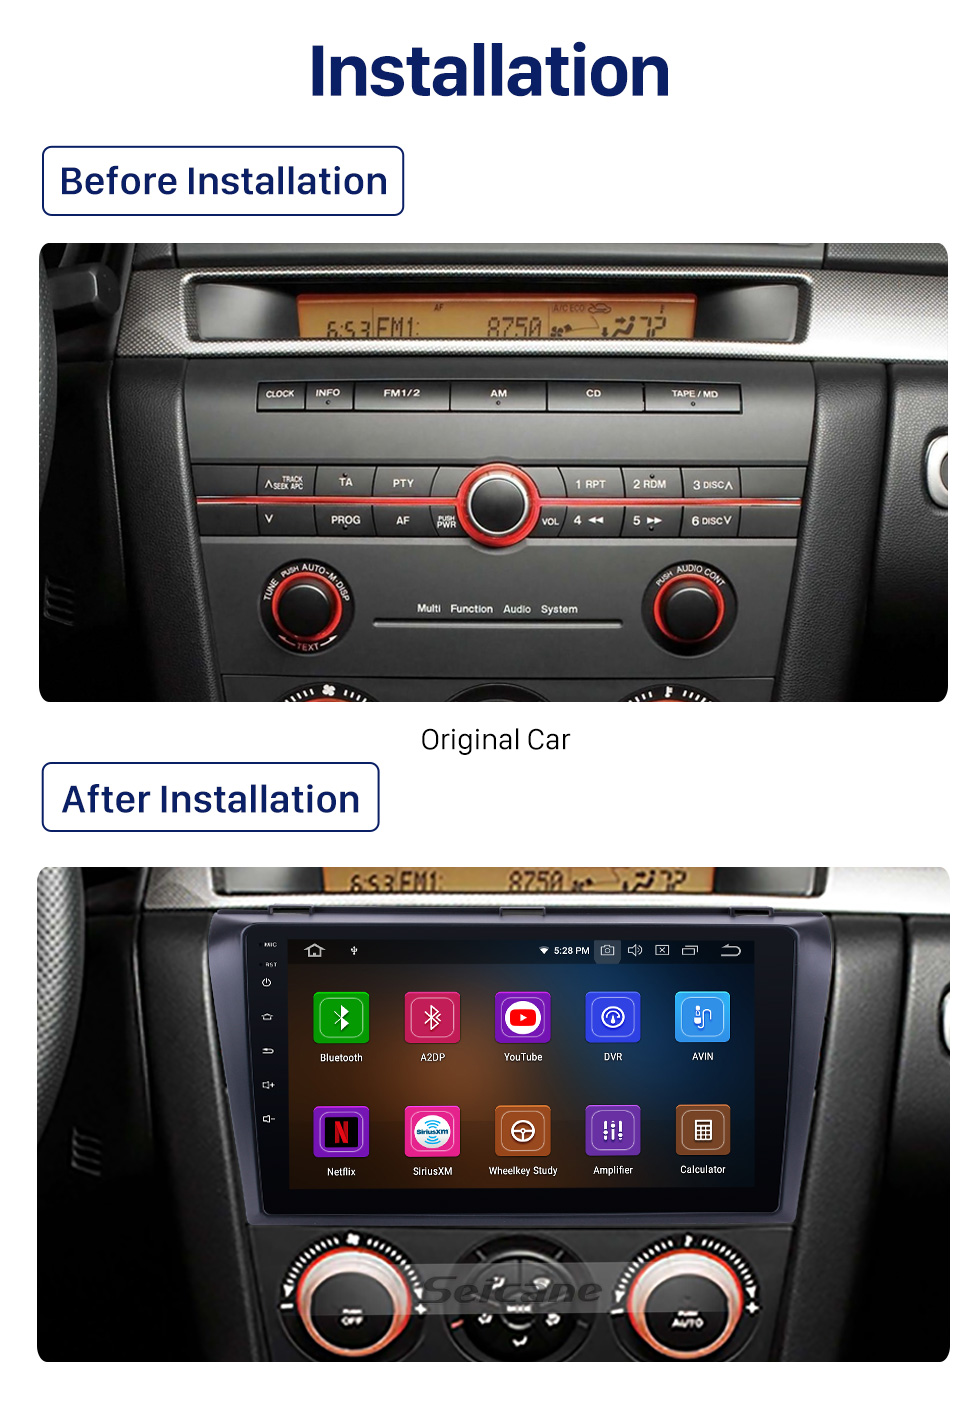 Seicane All-in-one Android 10.0 2004-2009 Mazda 3 Radio Upgrade with in Dash GPS Navigation System 1024*600 Multi-touch Capacitive Screen Bluetooth Music OBD2 3G WiFi HD 1080P DVR USB Backup Camera